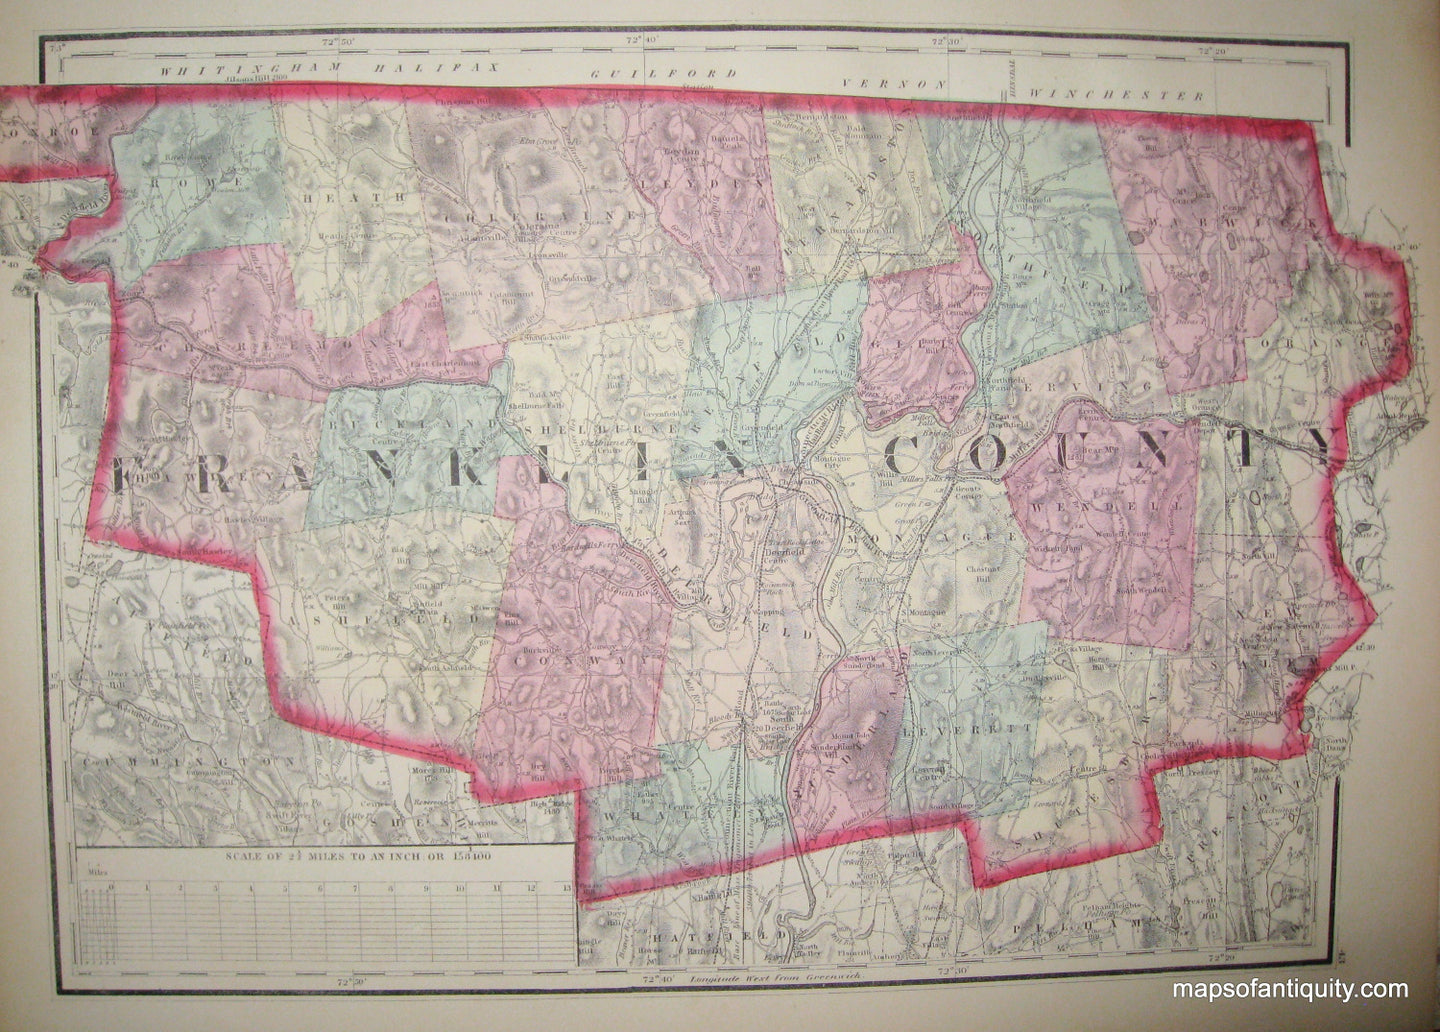 Antique-Hand-Colored-Map-Franklin-County-Massachusetts--US-Massachusetts-Mass.-Other-1871-Walling-&-Gray-Maps-Of-Antiquity